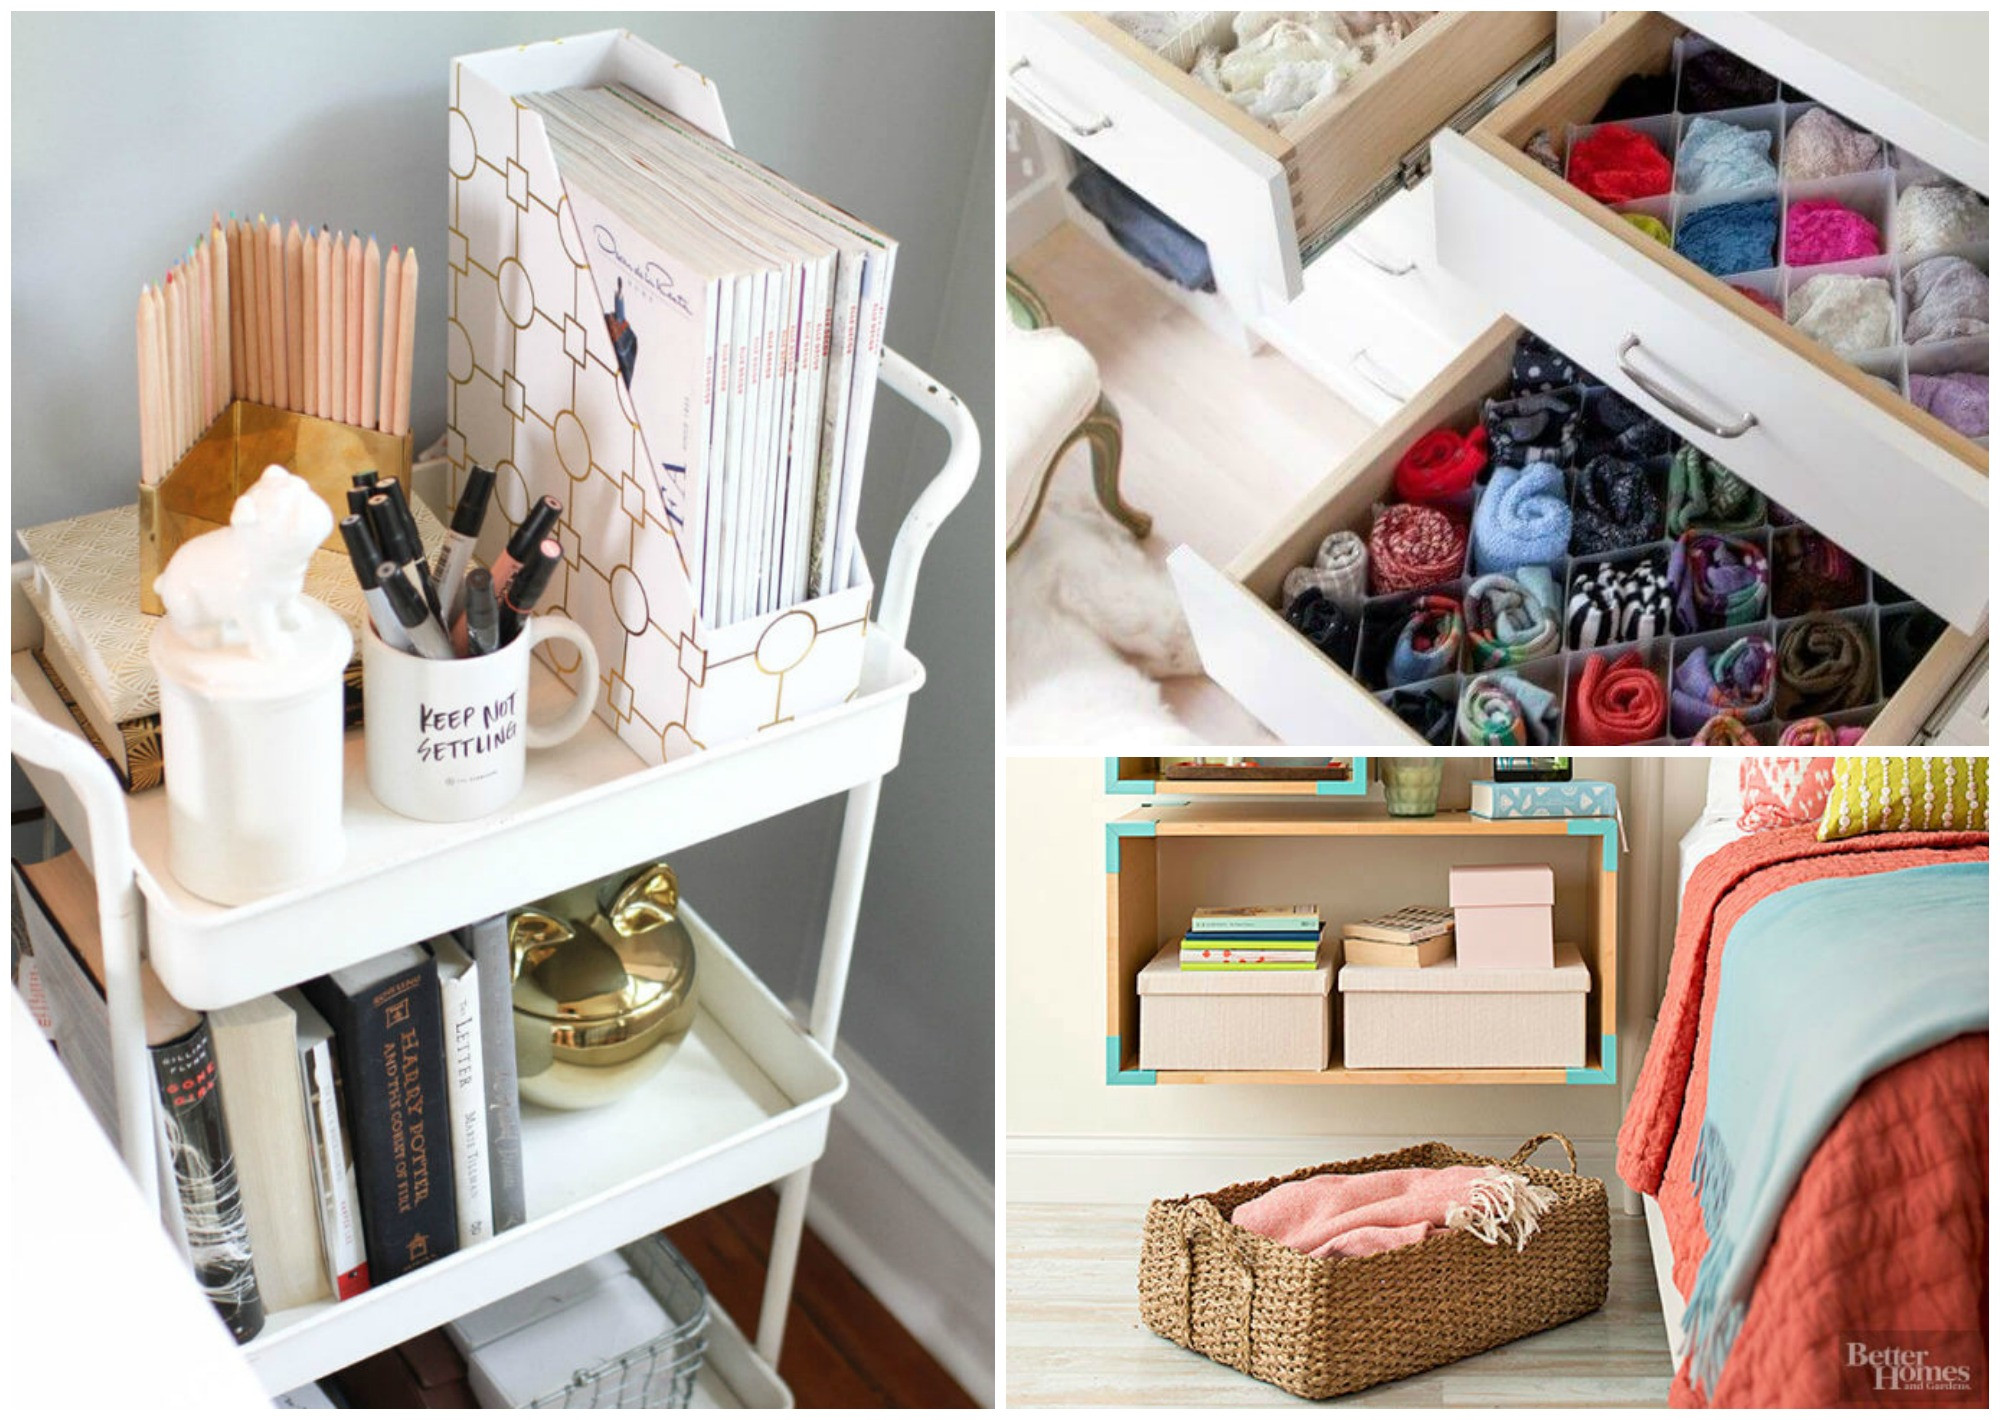 Organization Tips For Bedroom
 9 Super Efficient Ways to Organize Your Small Bedroom